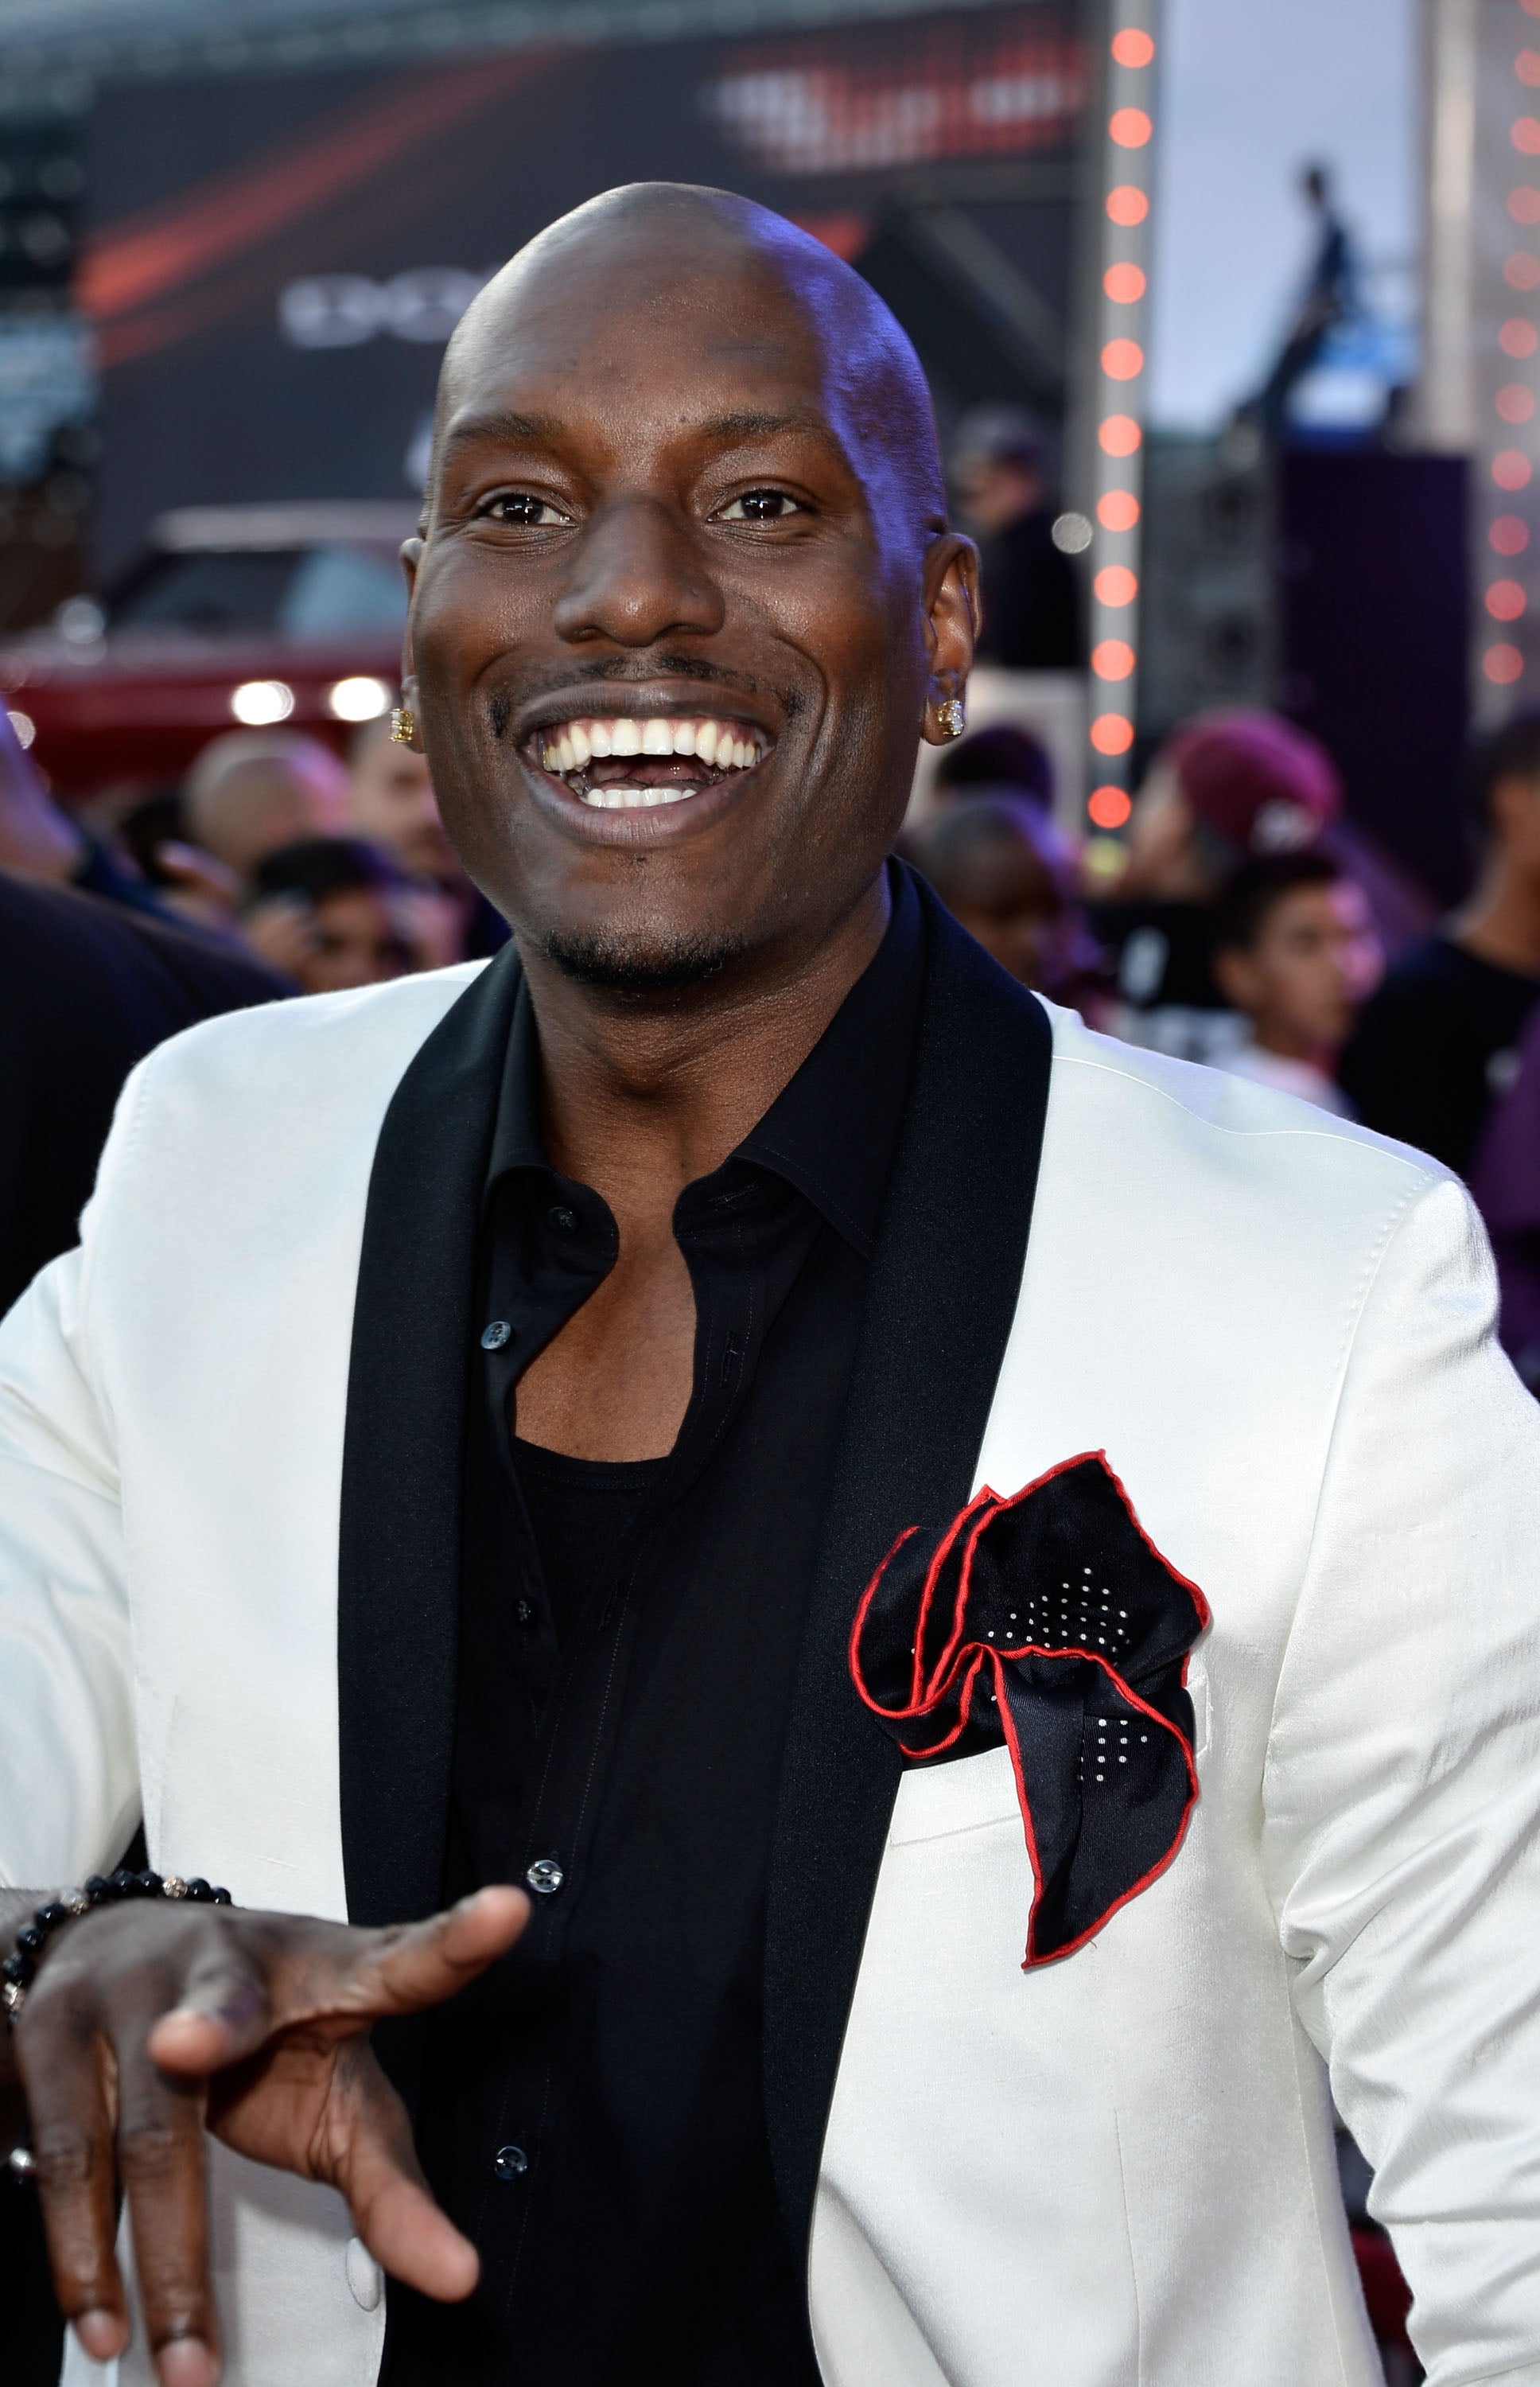 Tyrese Gibson Slams 'Fast and Furious' Spinoff: 'The Real Selfish #CandyA** Revealed ...1936 x 3000